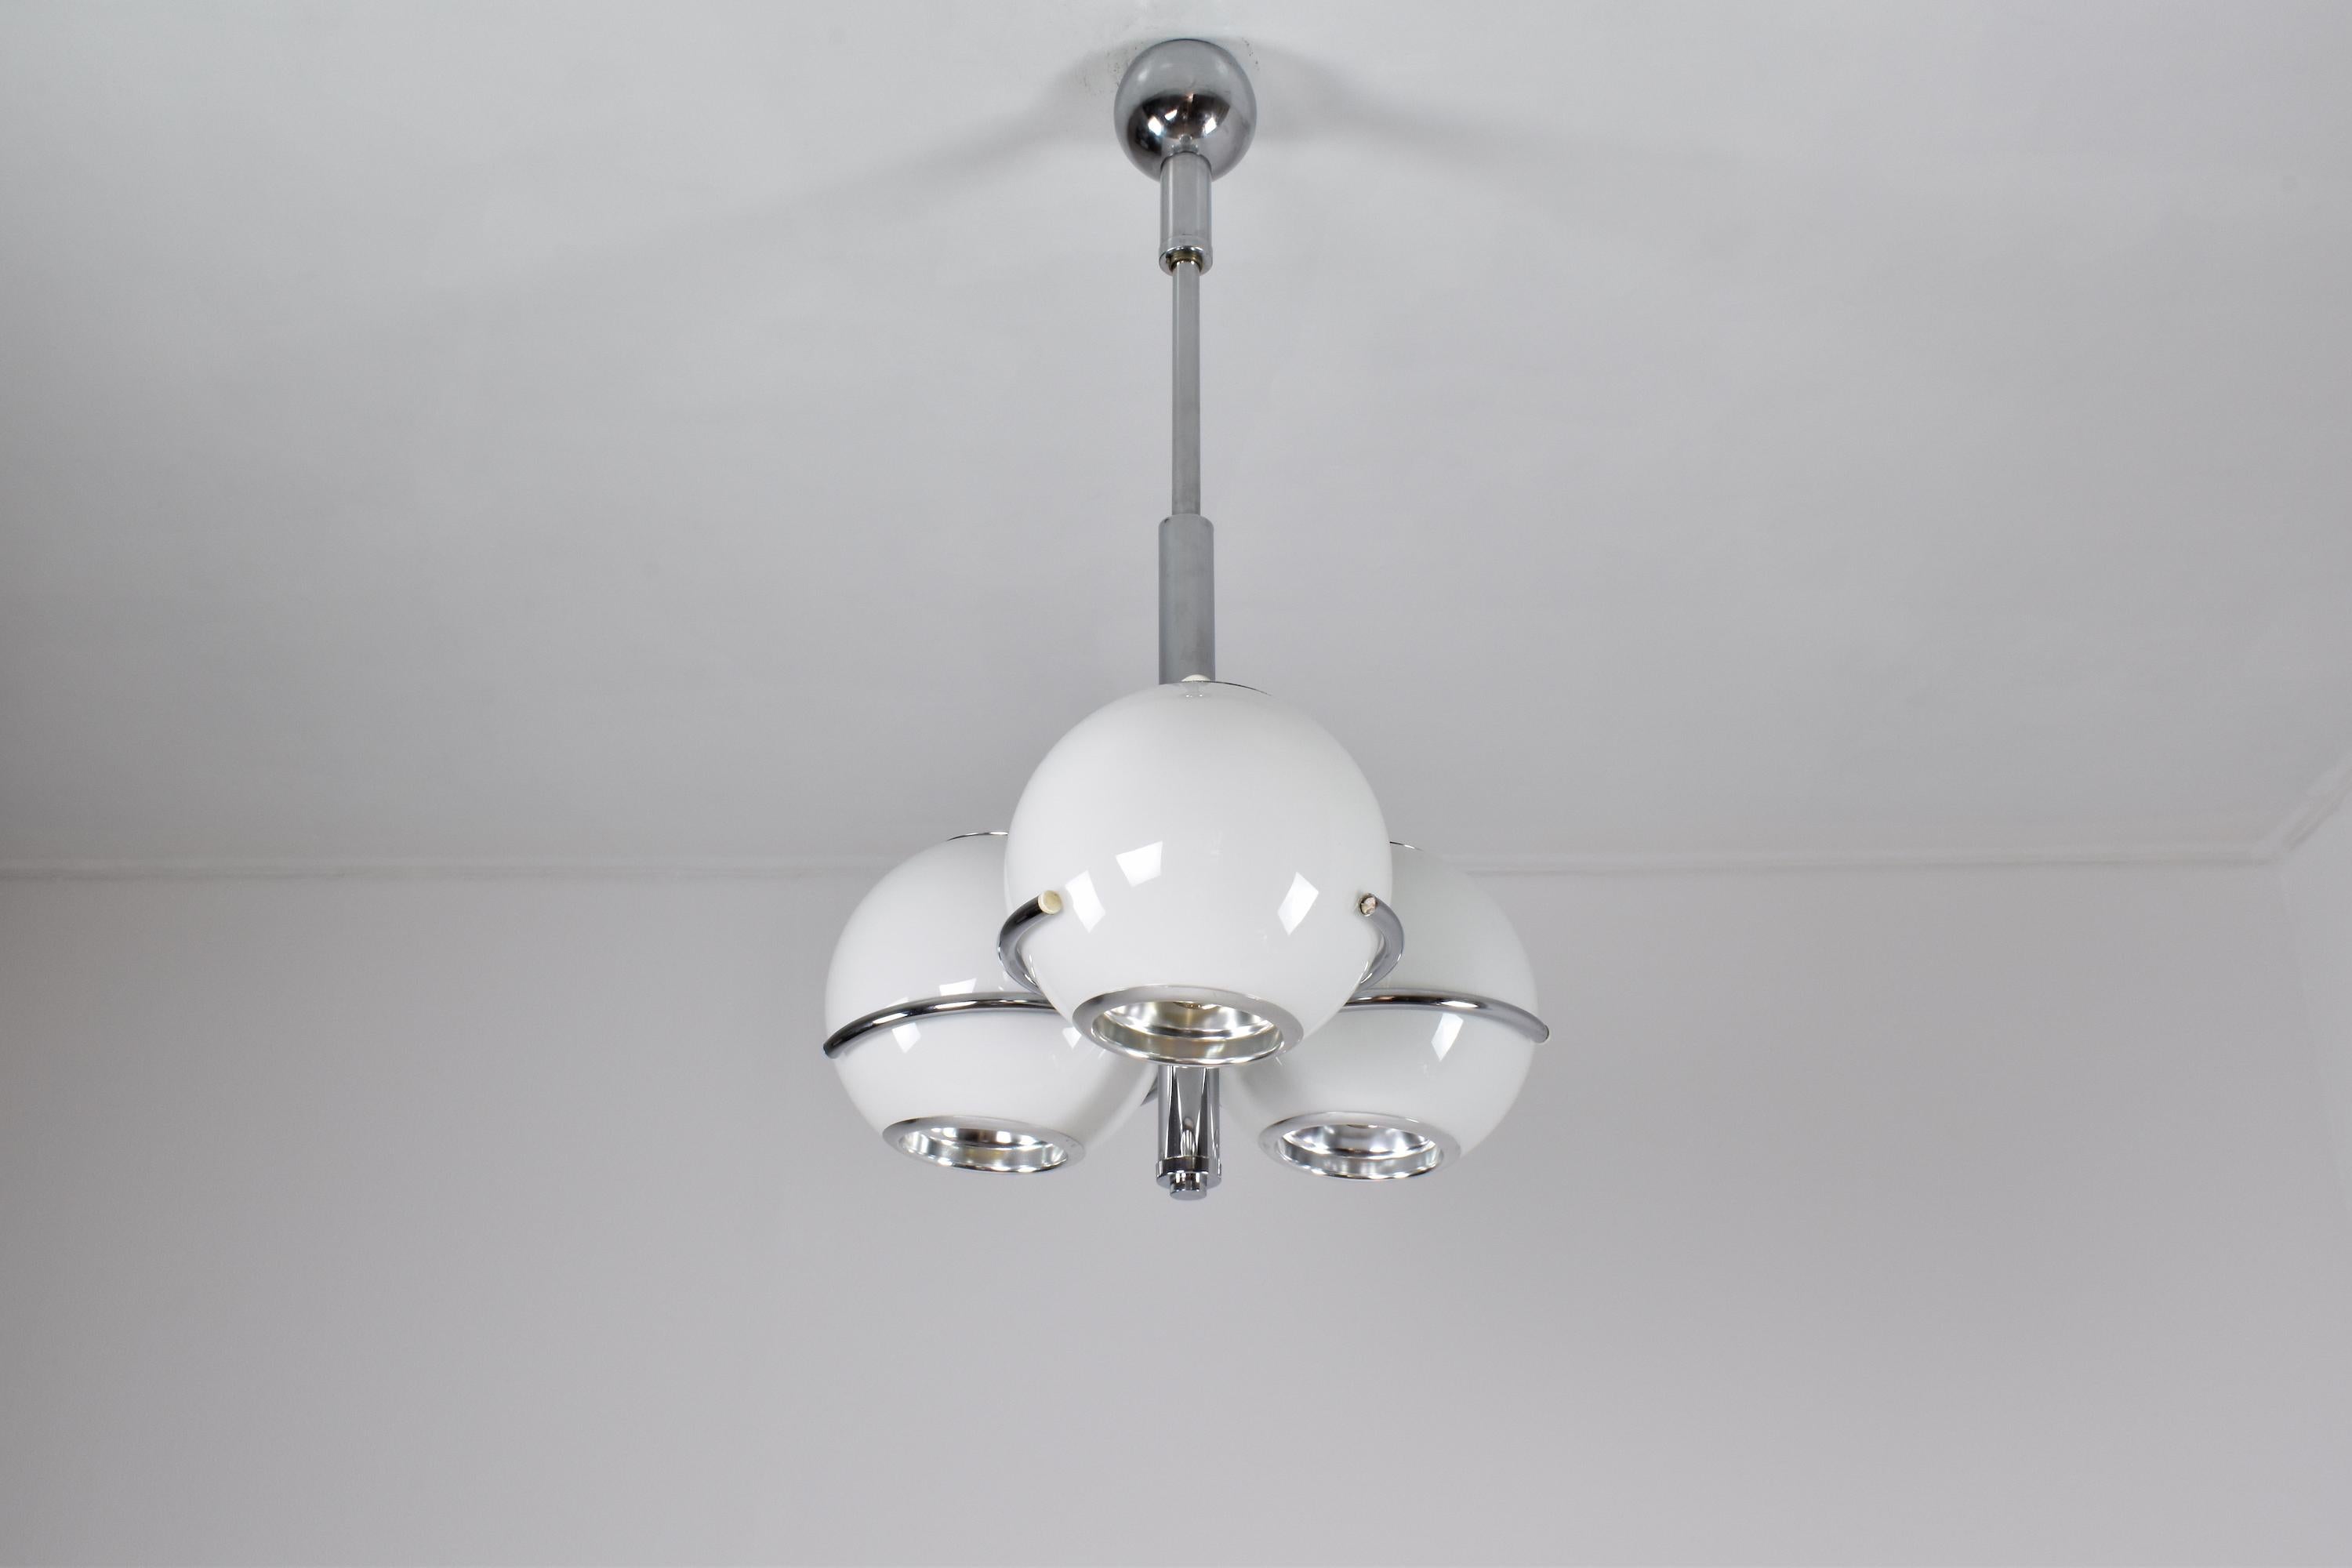 A 20th-century vintage pendant by notable Italian manufacturer Reggiani from the 1970's. This lighting piece is in beautiful condition and is designed with a chic stainless steel structure and three opaque glass globe-shaped shades. 
This piece is